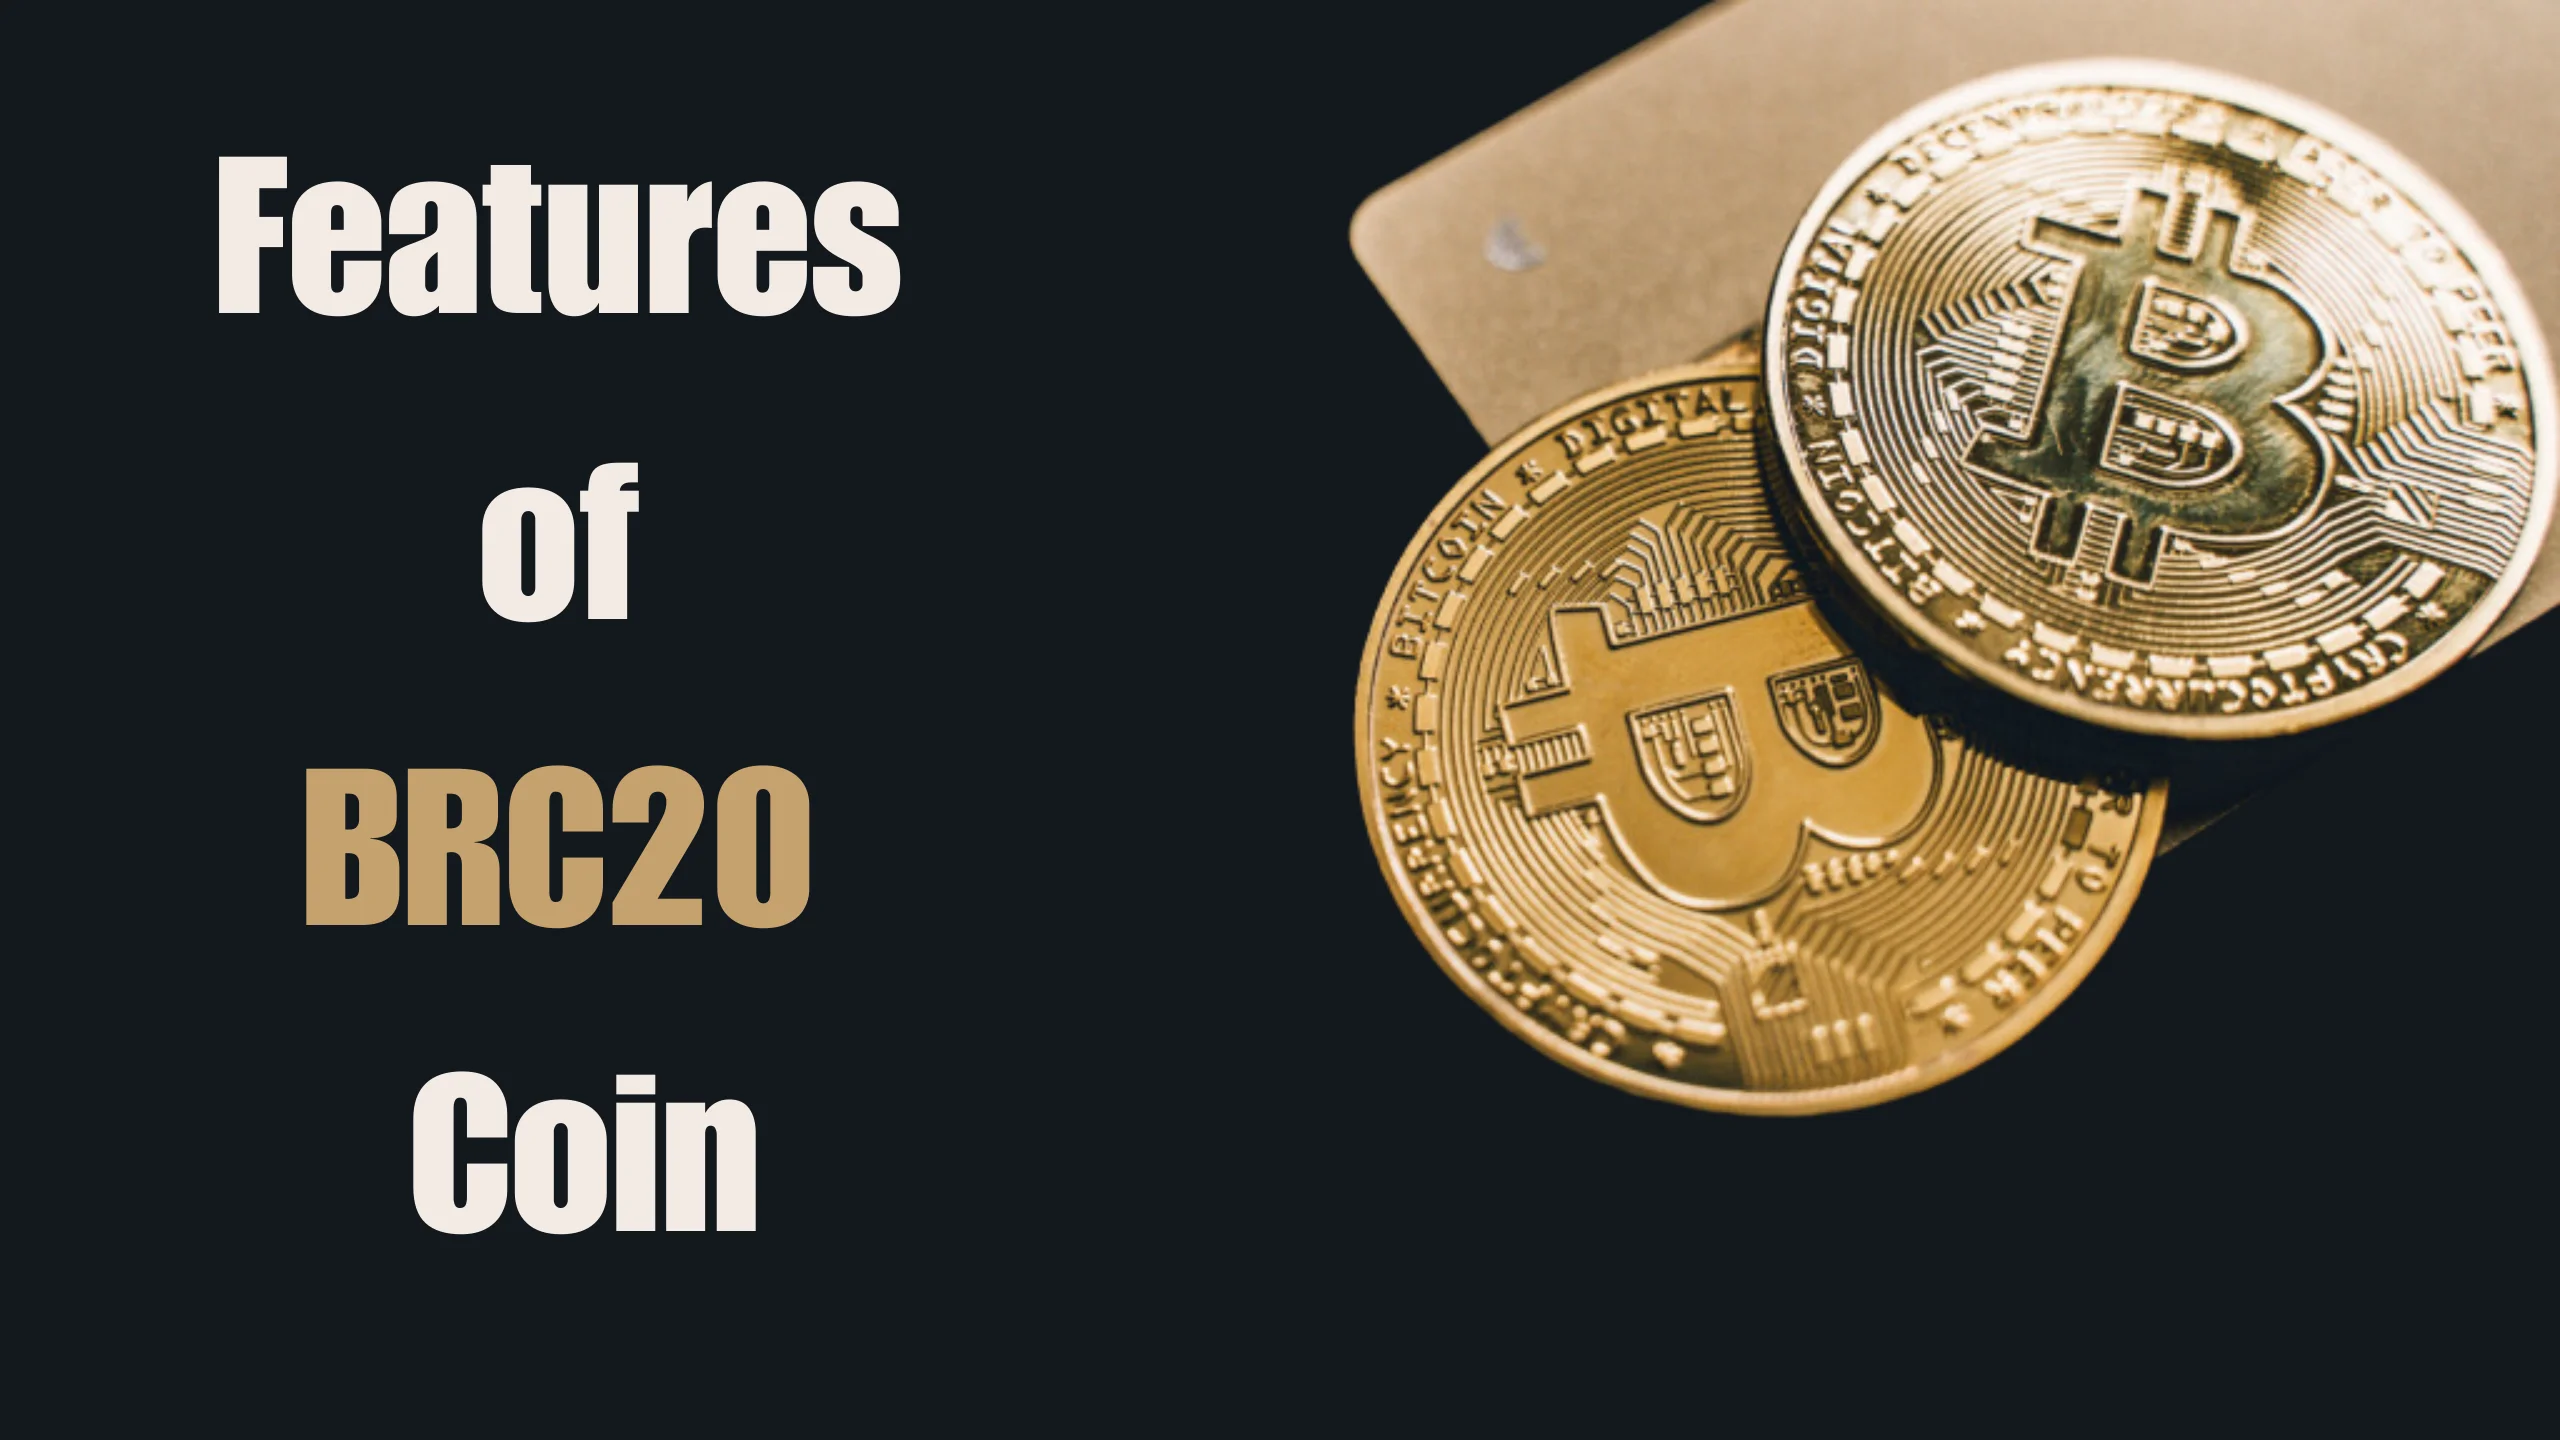 Key features of BRC20 coins for seamless transactions and robust functionality.